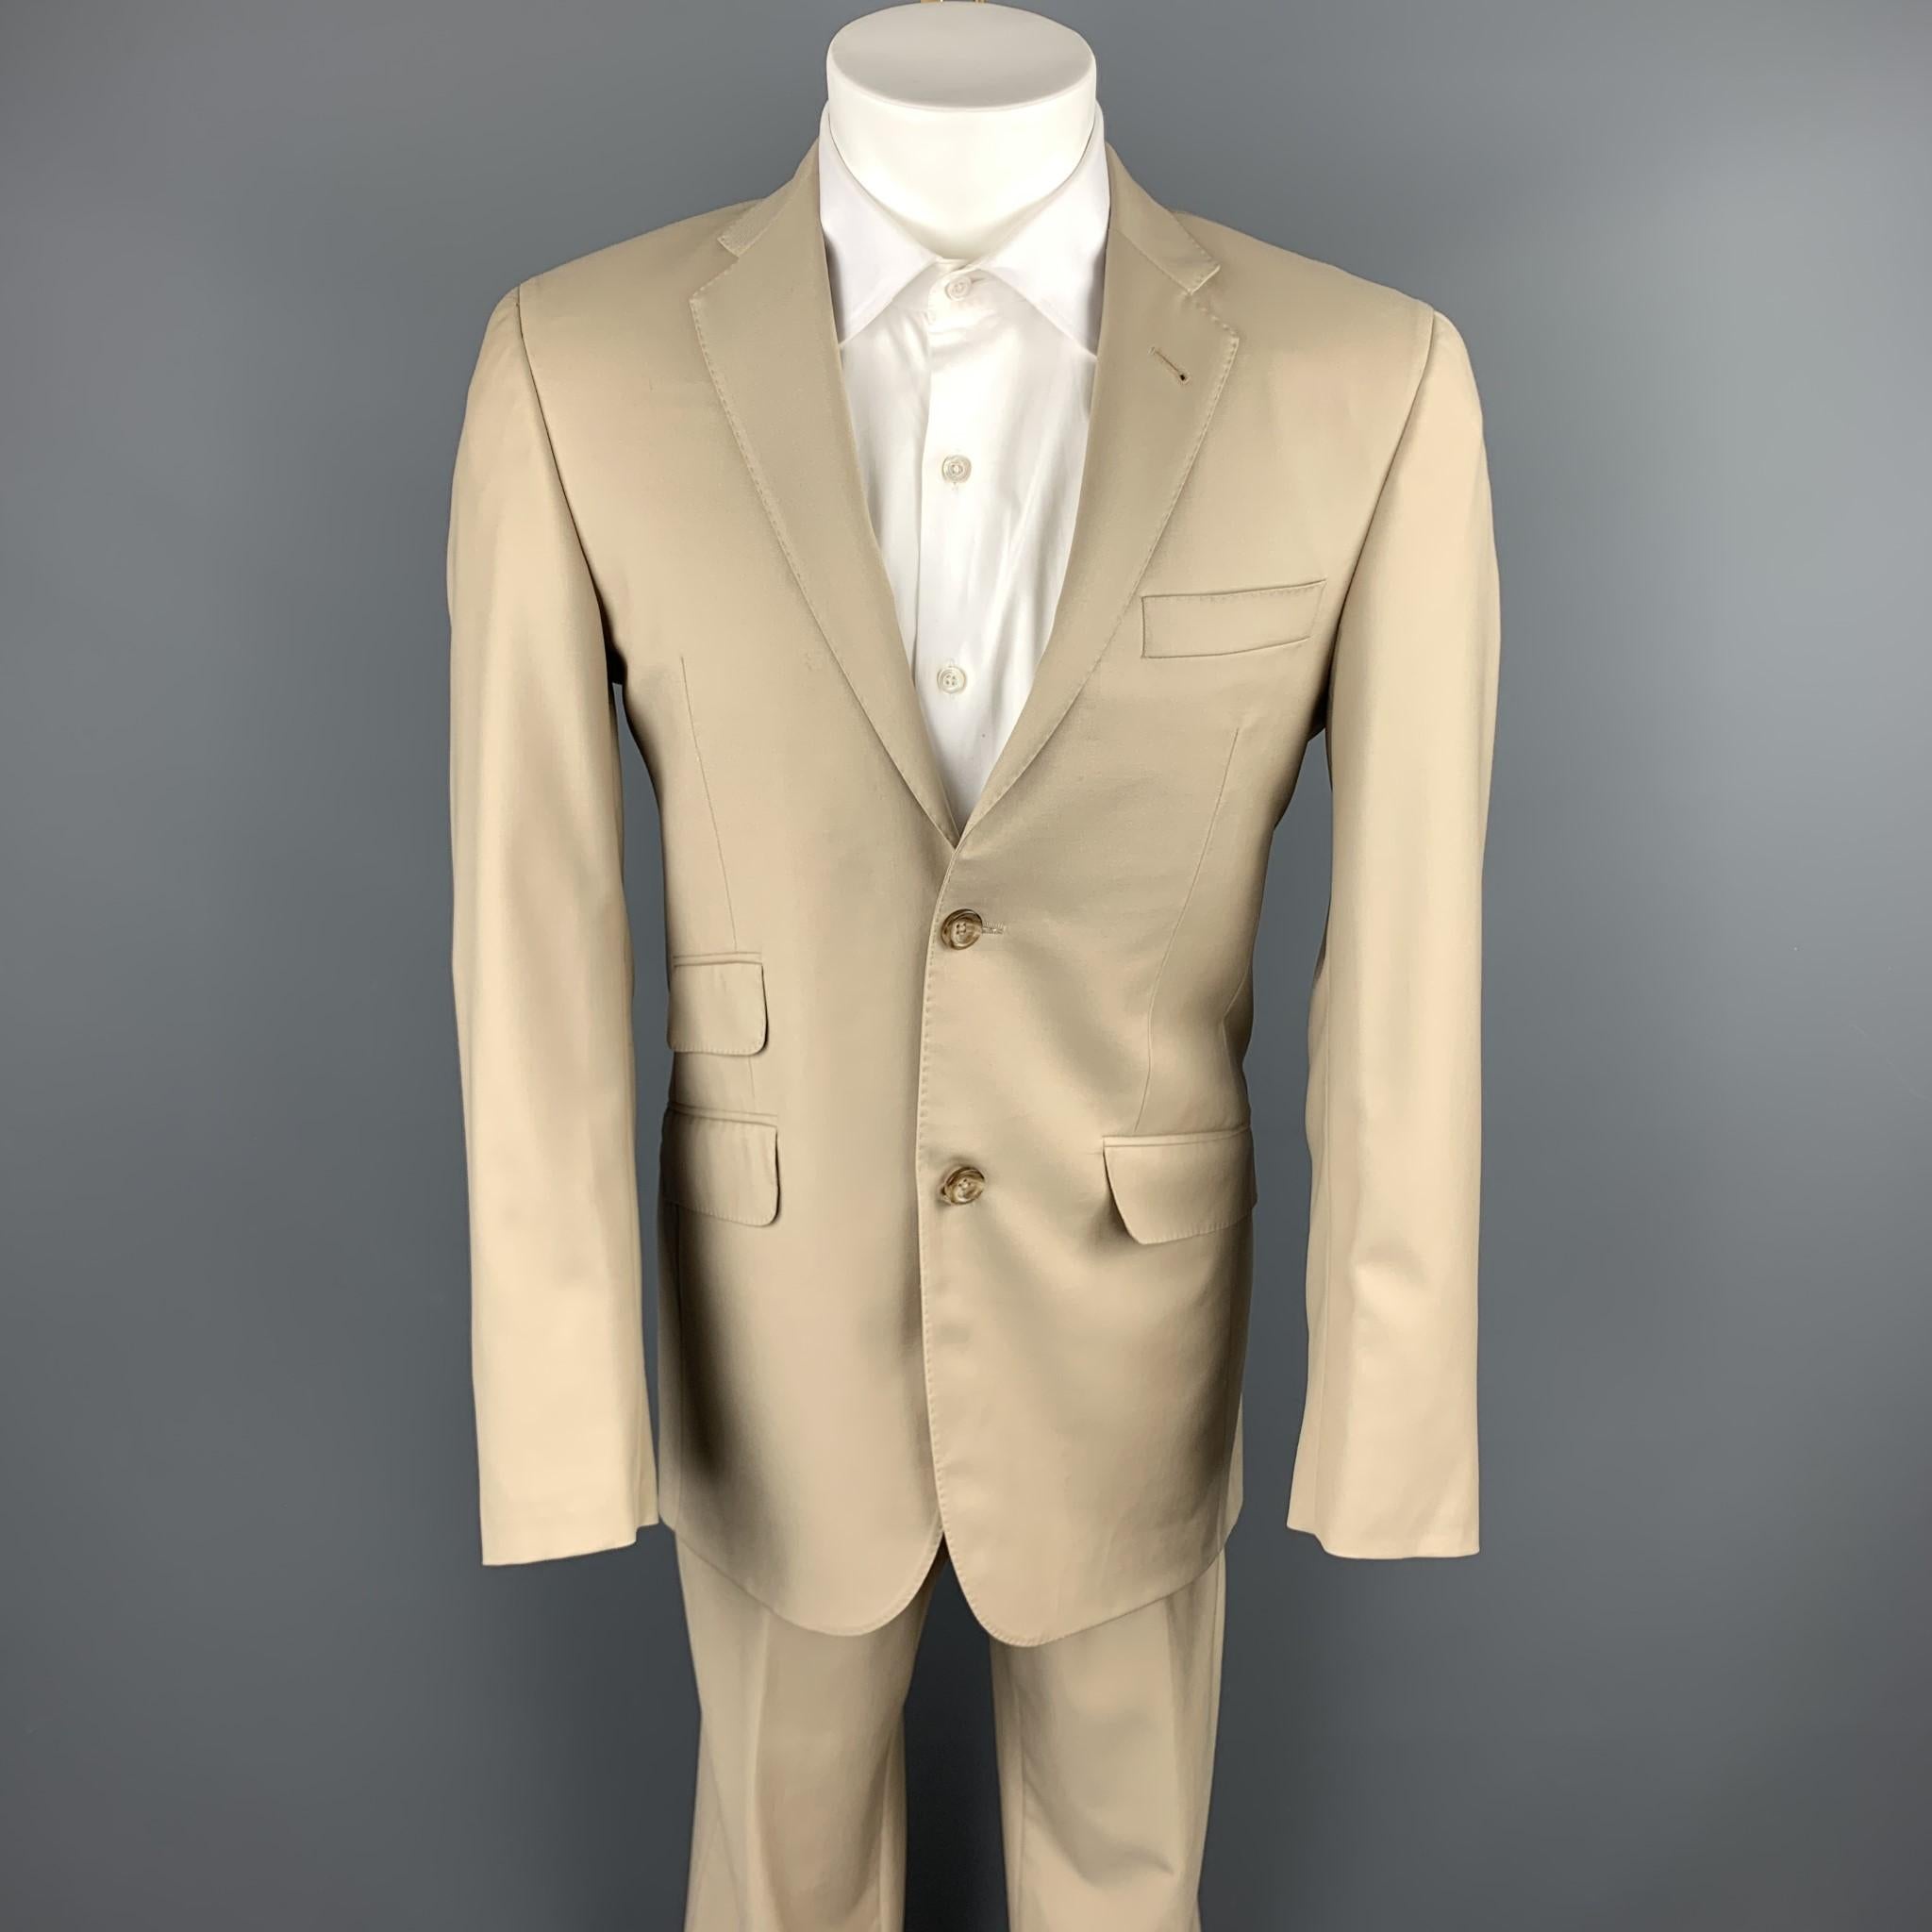 BURBERRY LONDON suit comes in a khaki wool and includes a single breasted, two button sport coat with a notch lapel and matching flat front trousers. Made in USA.

Excellent Pre-Owned Condition.
Marked: 36

Measurements:

-Jacket
Shoulder: 16